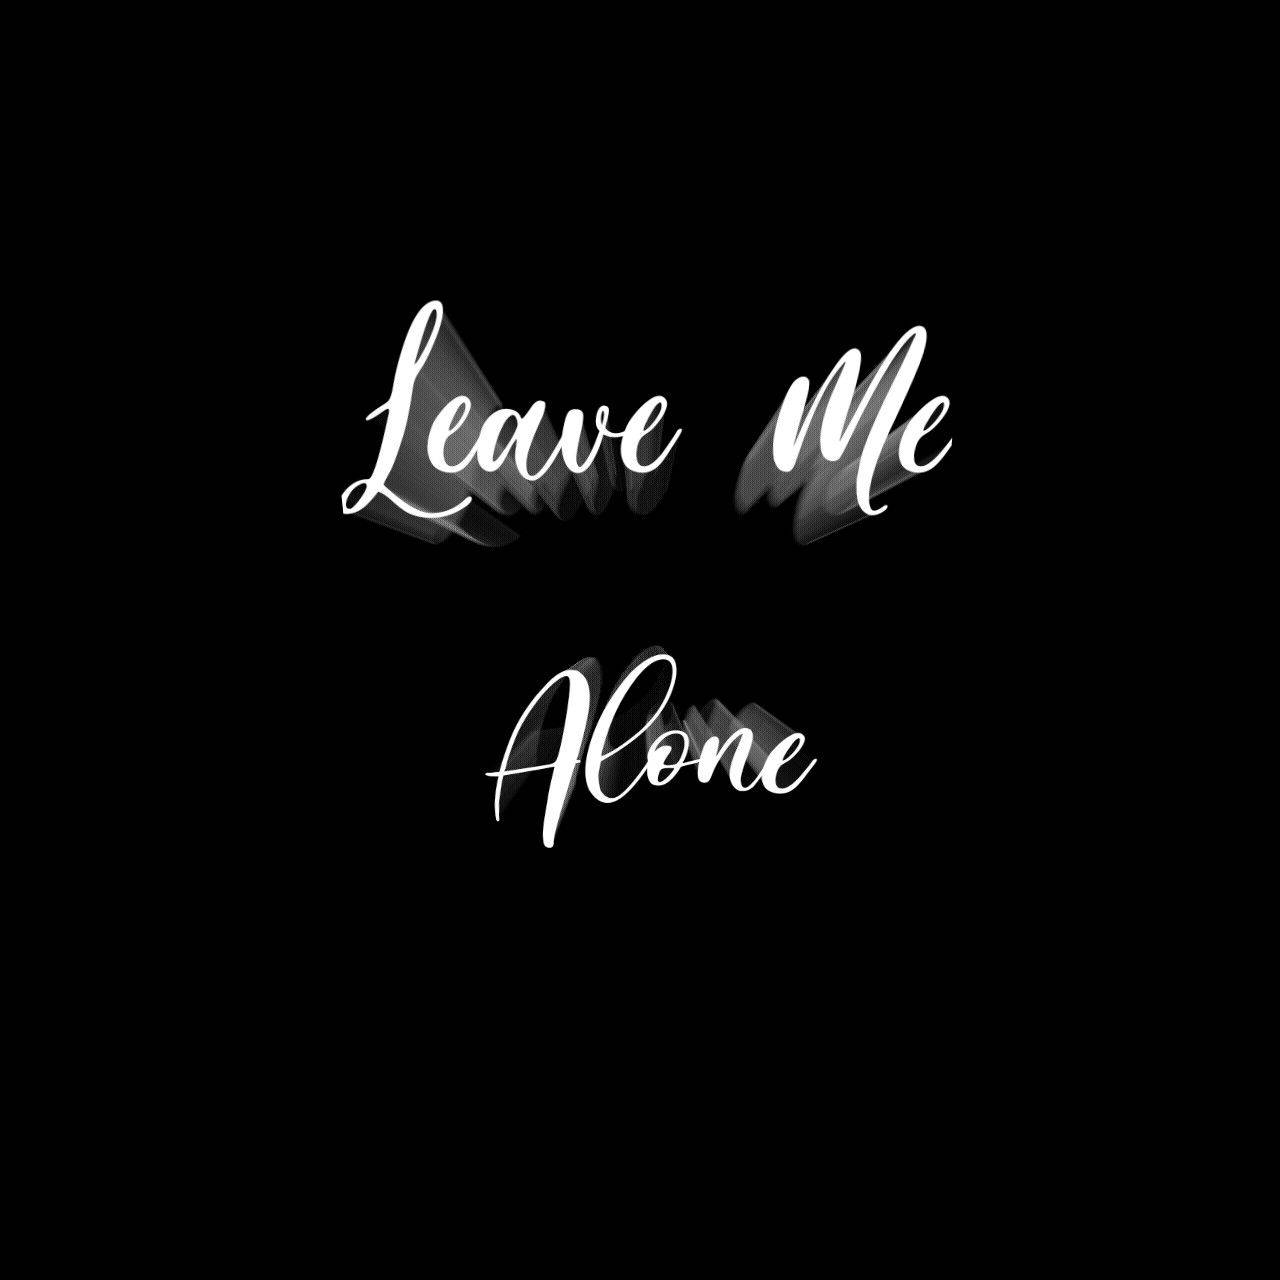 Black And White Leave Me Alone Wallpaper